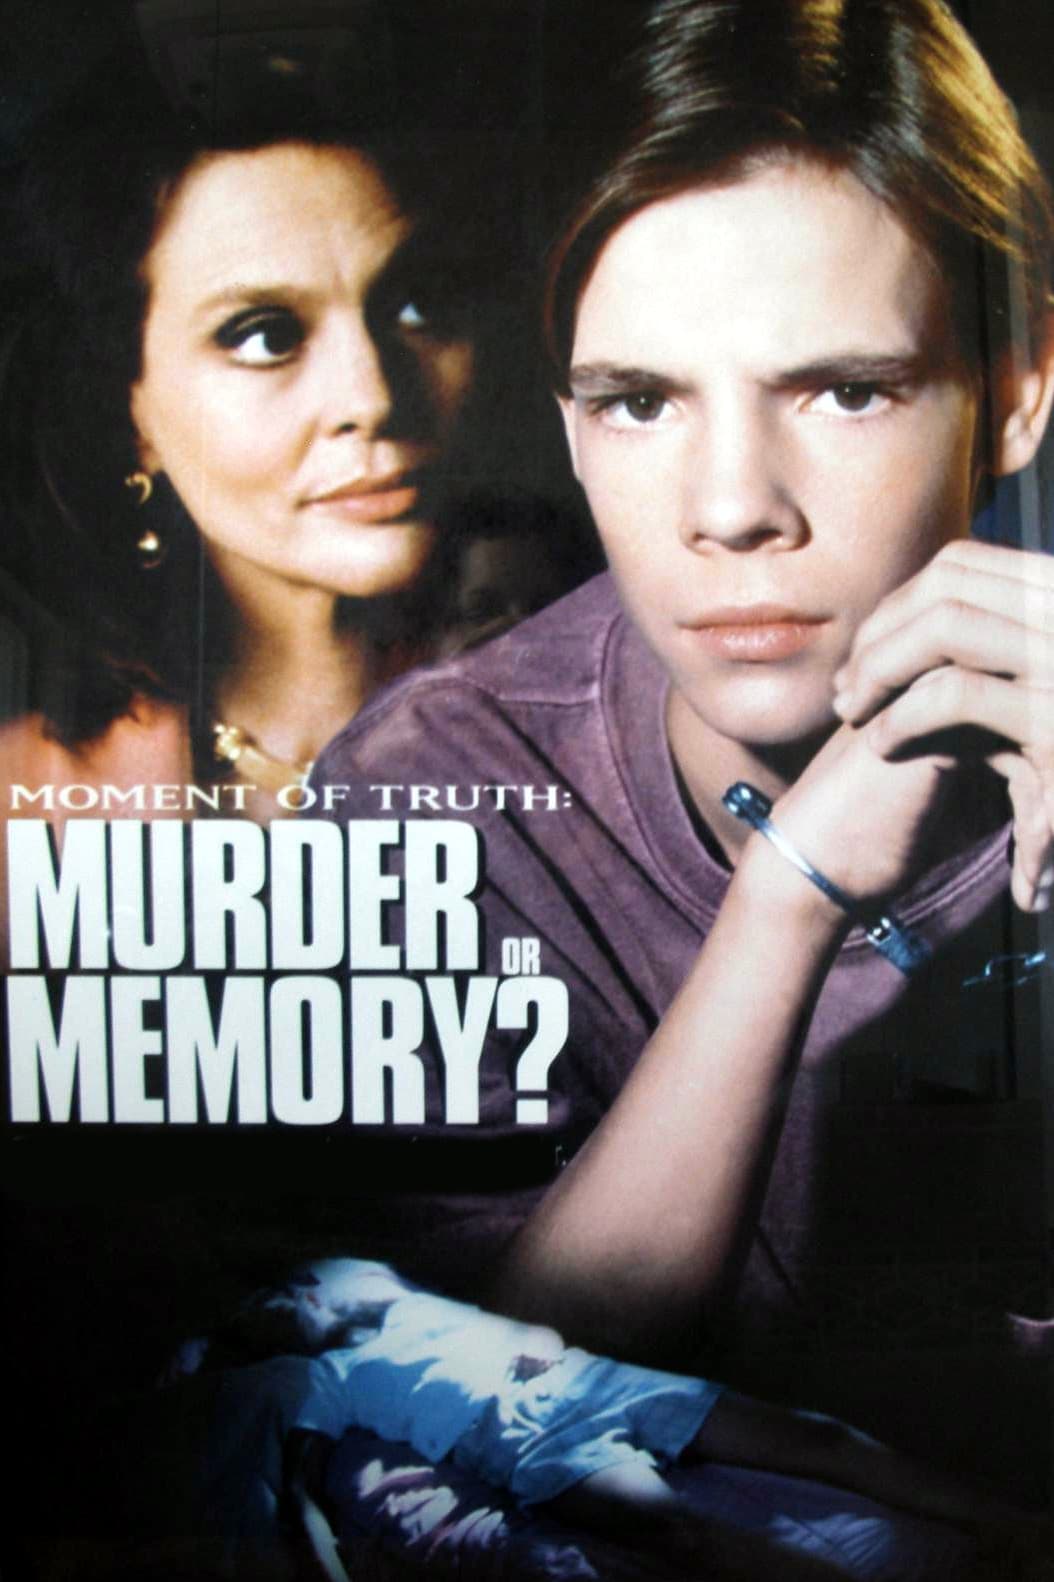 Murder or Memory: A Moment of Truth Movie (1994)